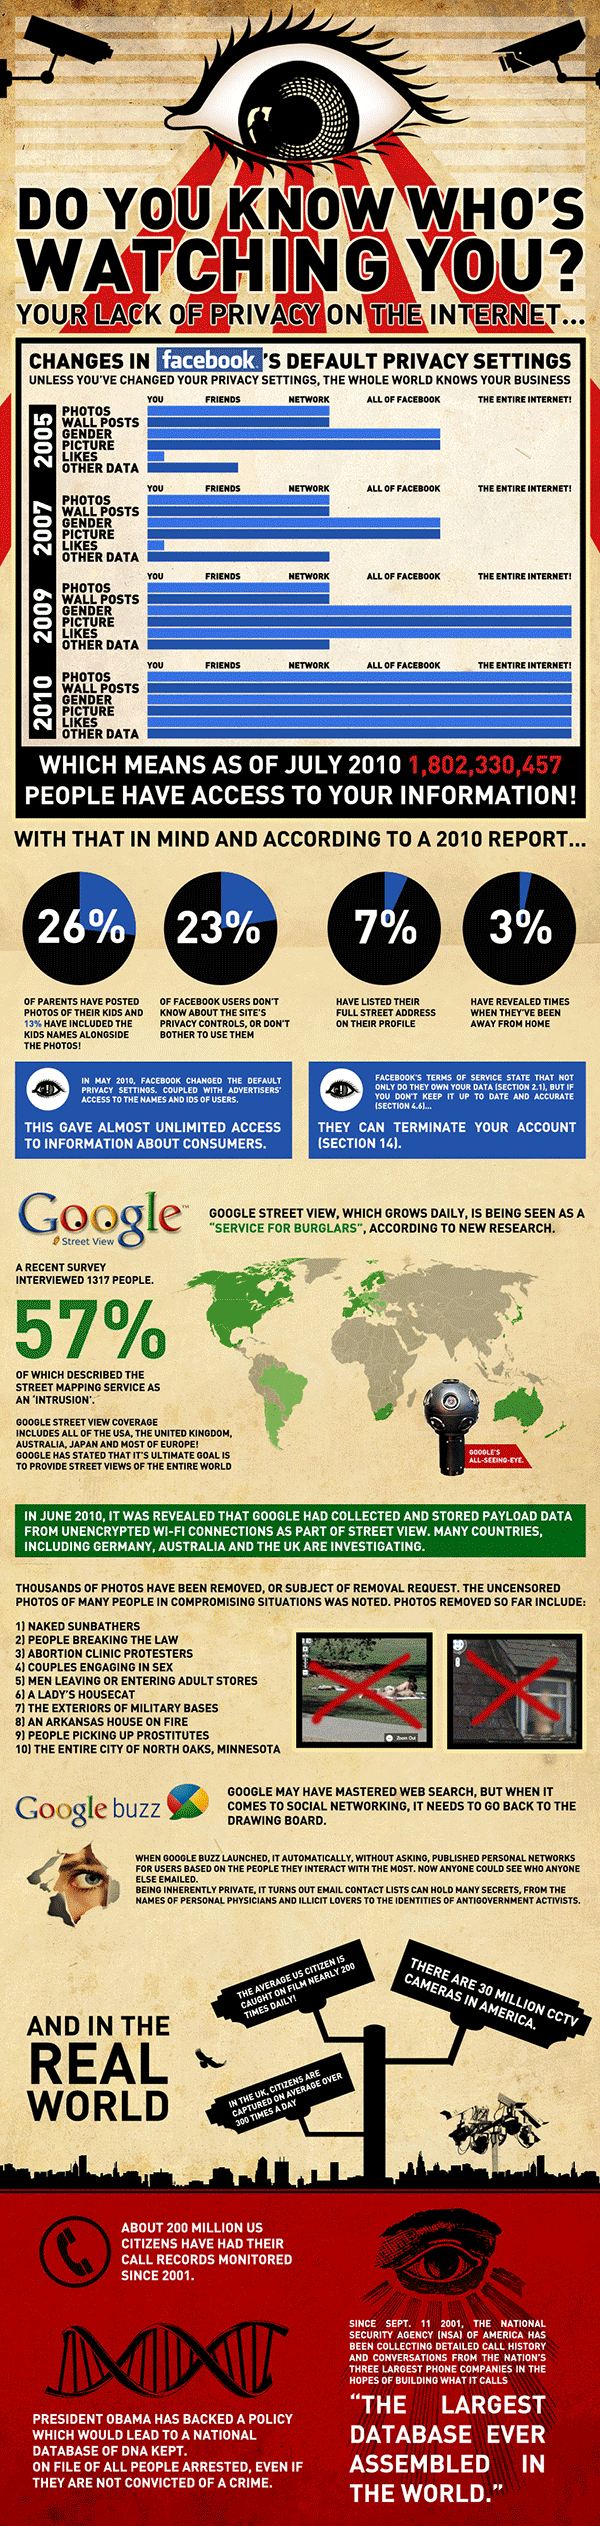 Do You Know Who's Watching You on Google?